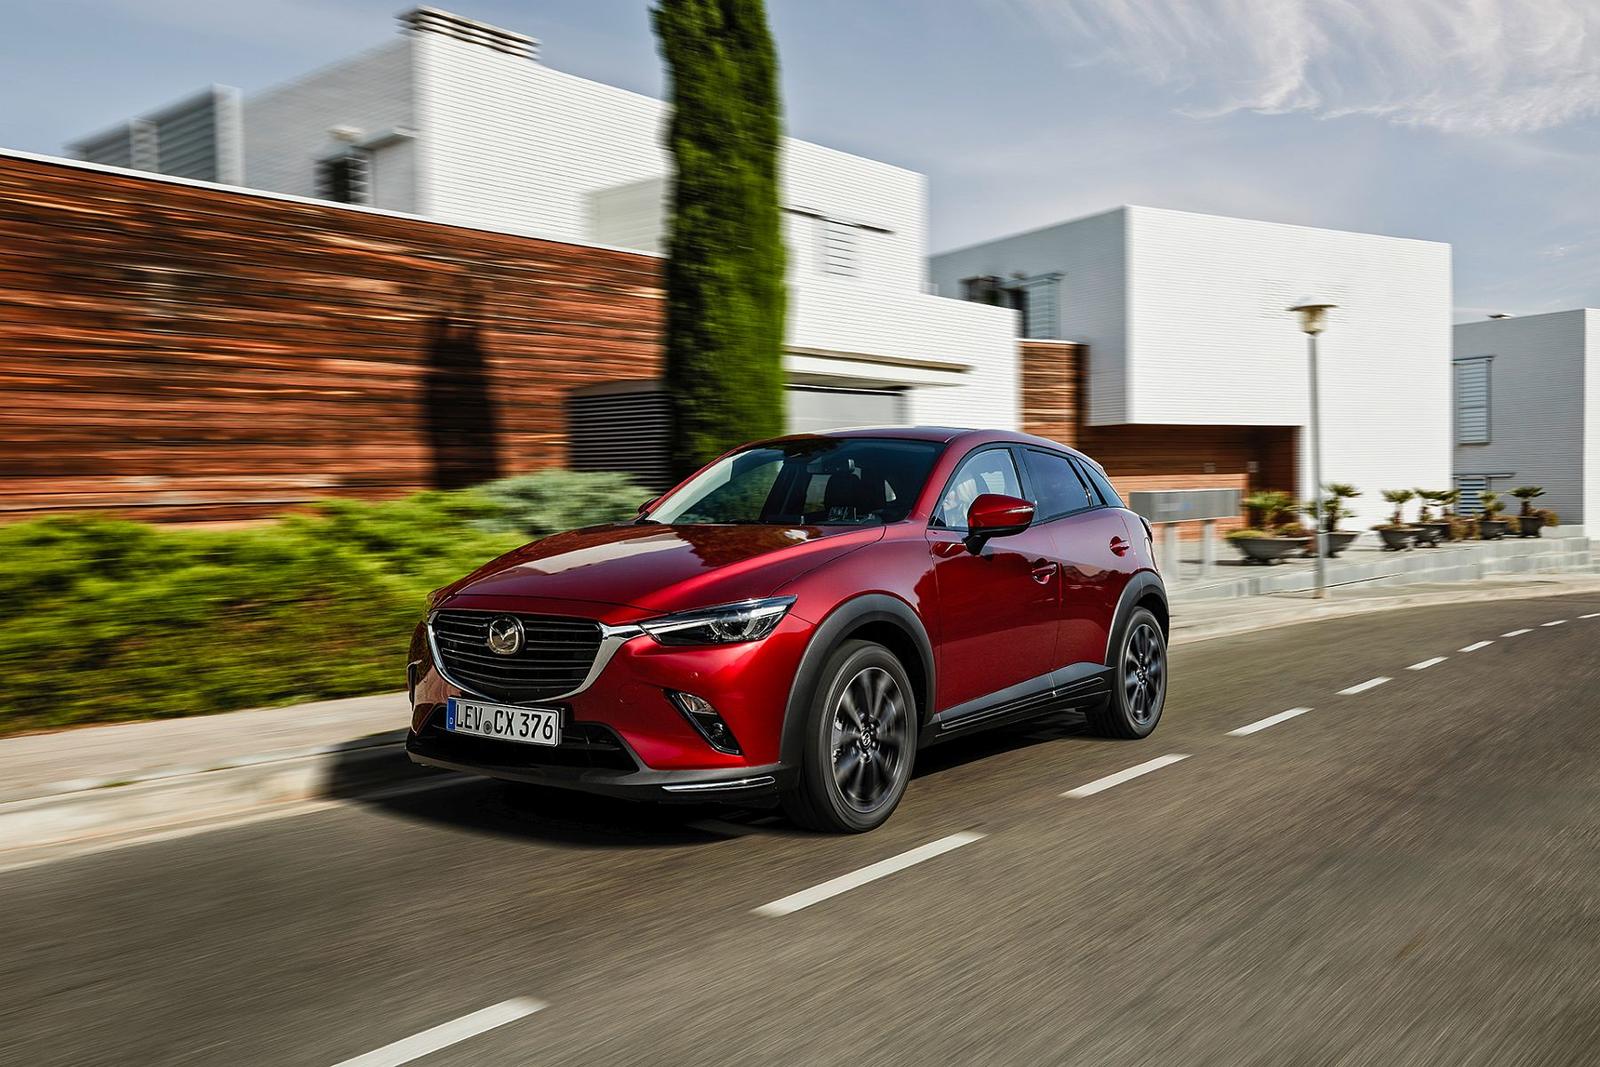 01_2018_MAZDA_CX-3_ACTION_FRONT